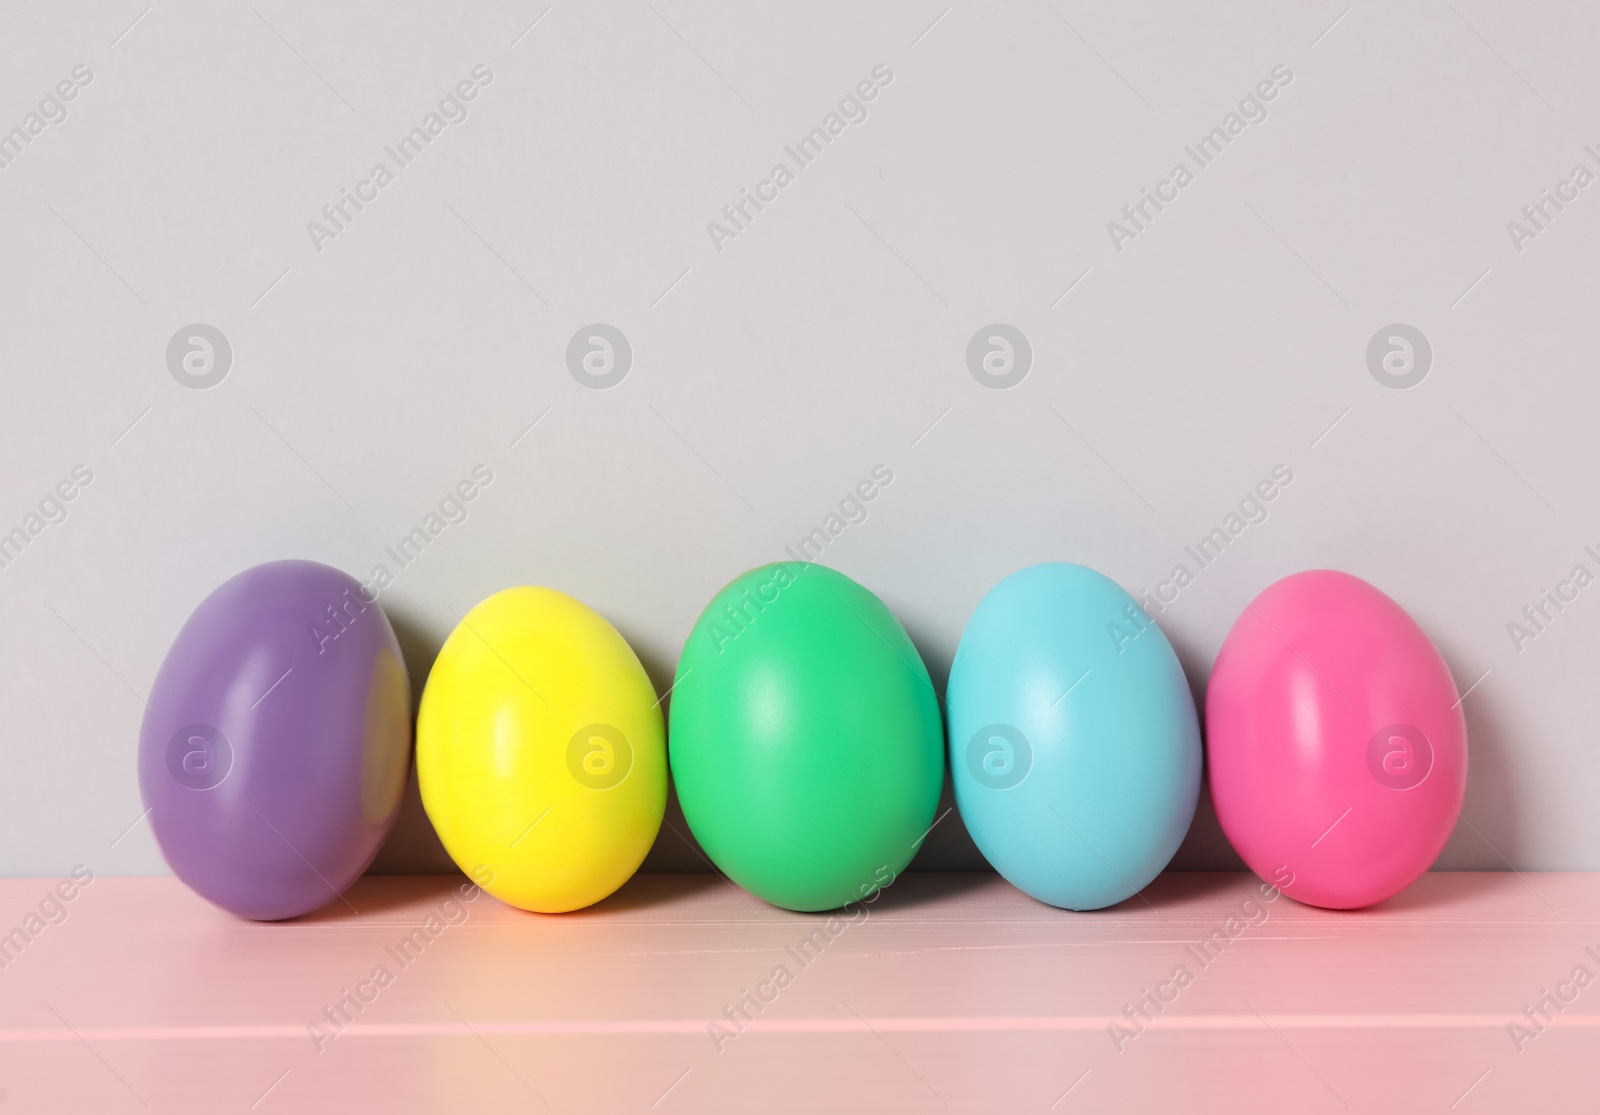 Photo of Easter eggs on pink wooden table against light grey background, space for text